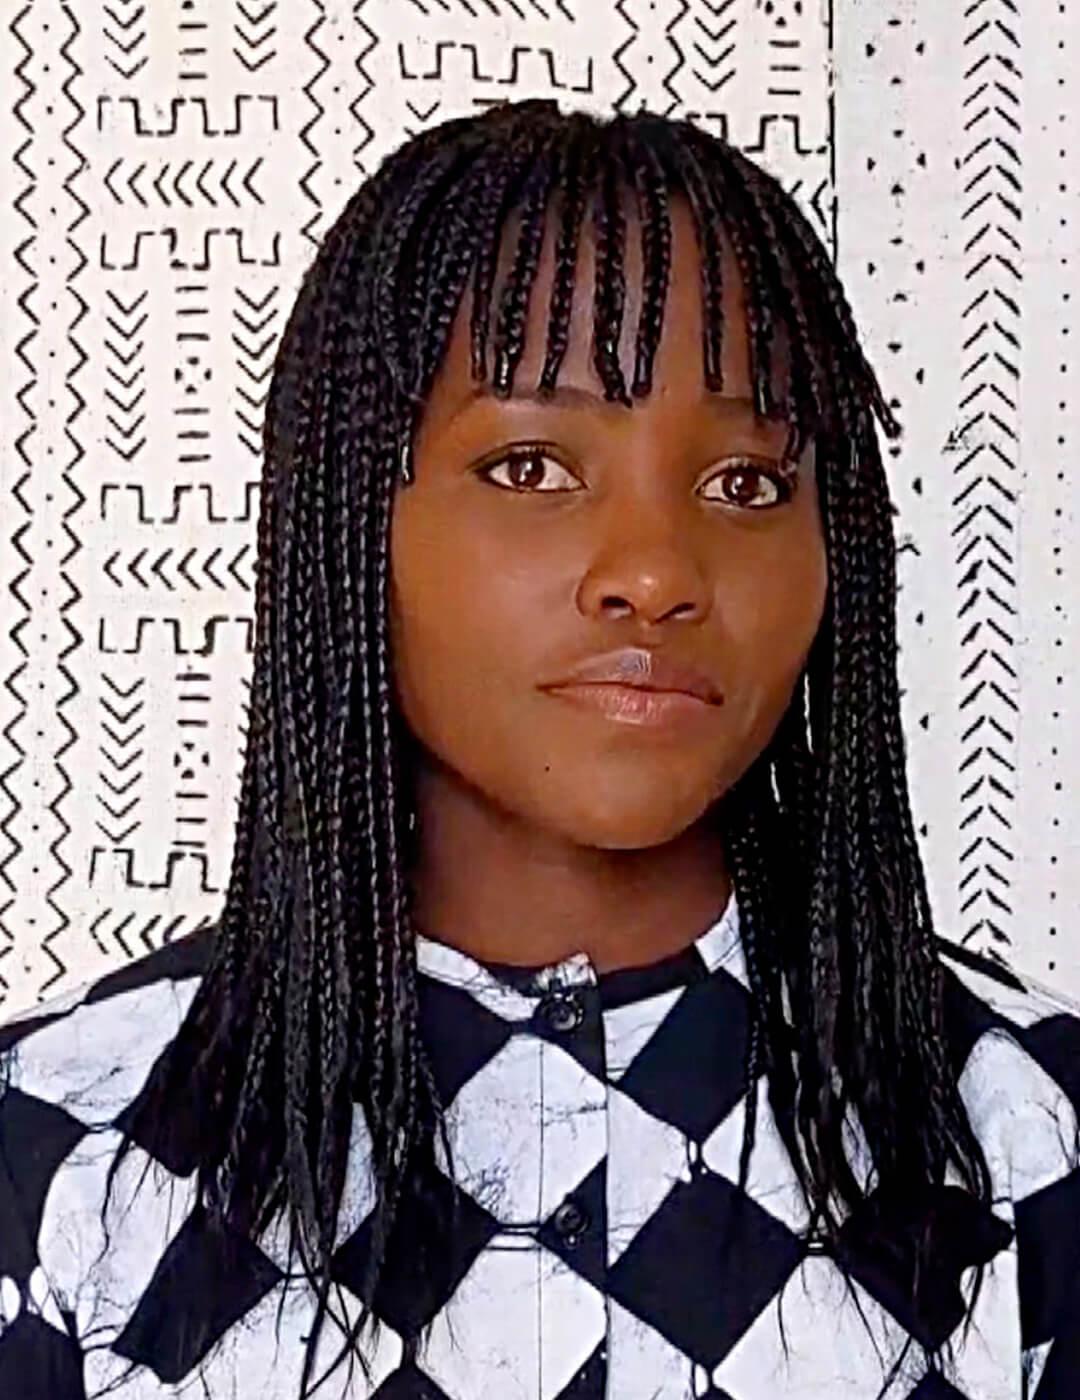 Lupita Nyong'o looking chic in a black and white geometric outfit and braided hairstyle with braided bangs